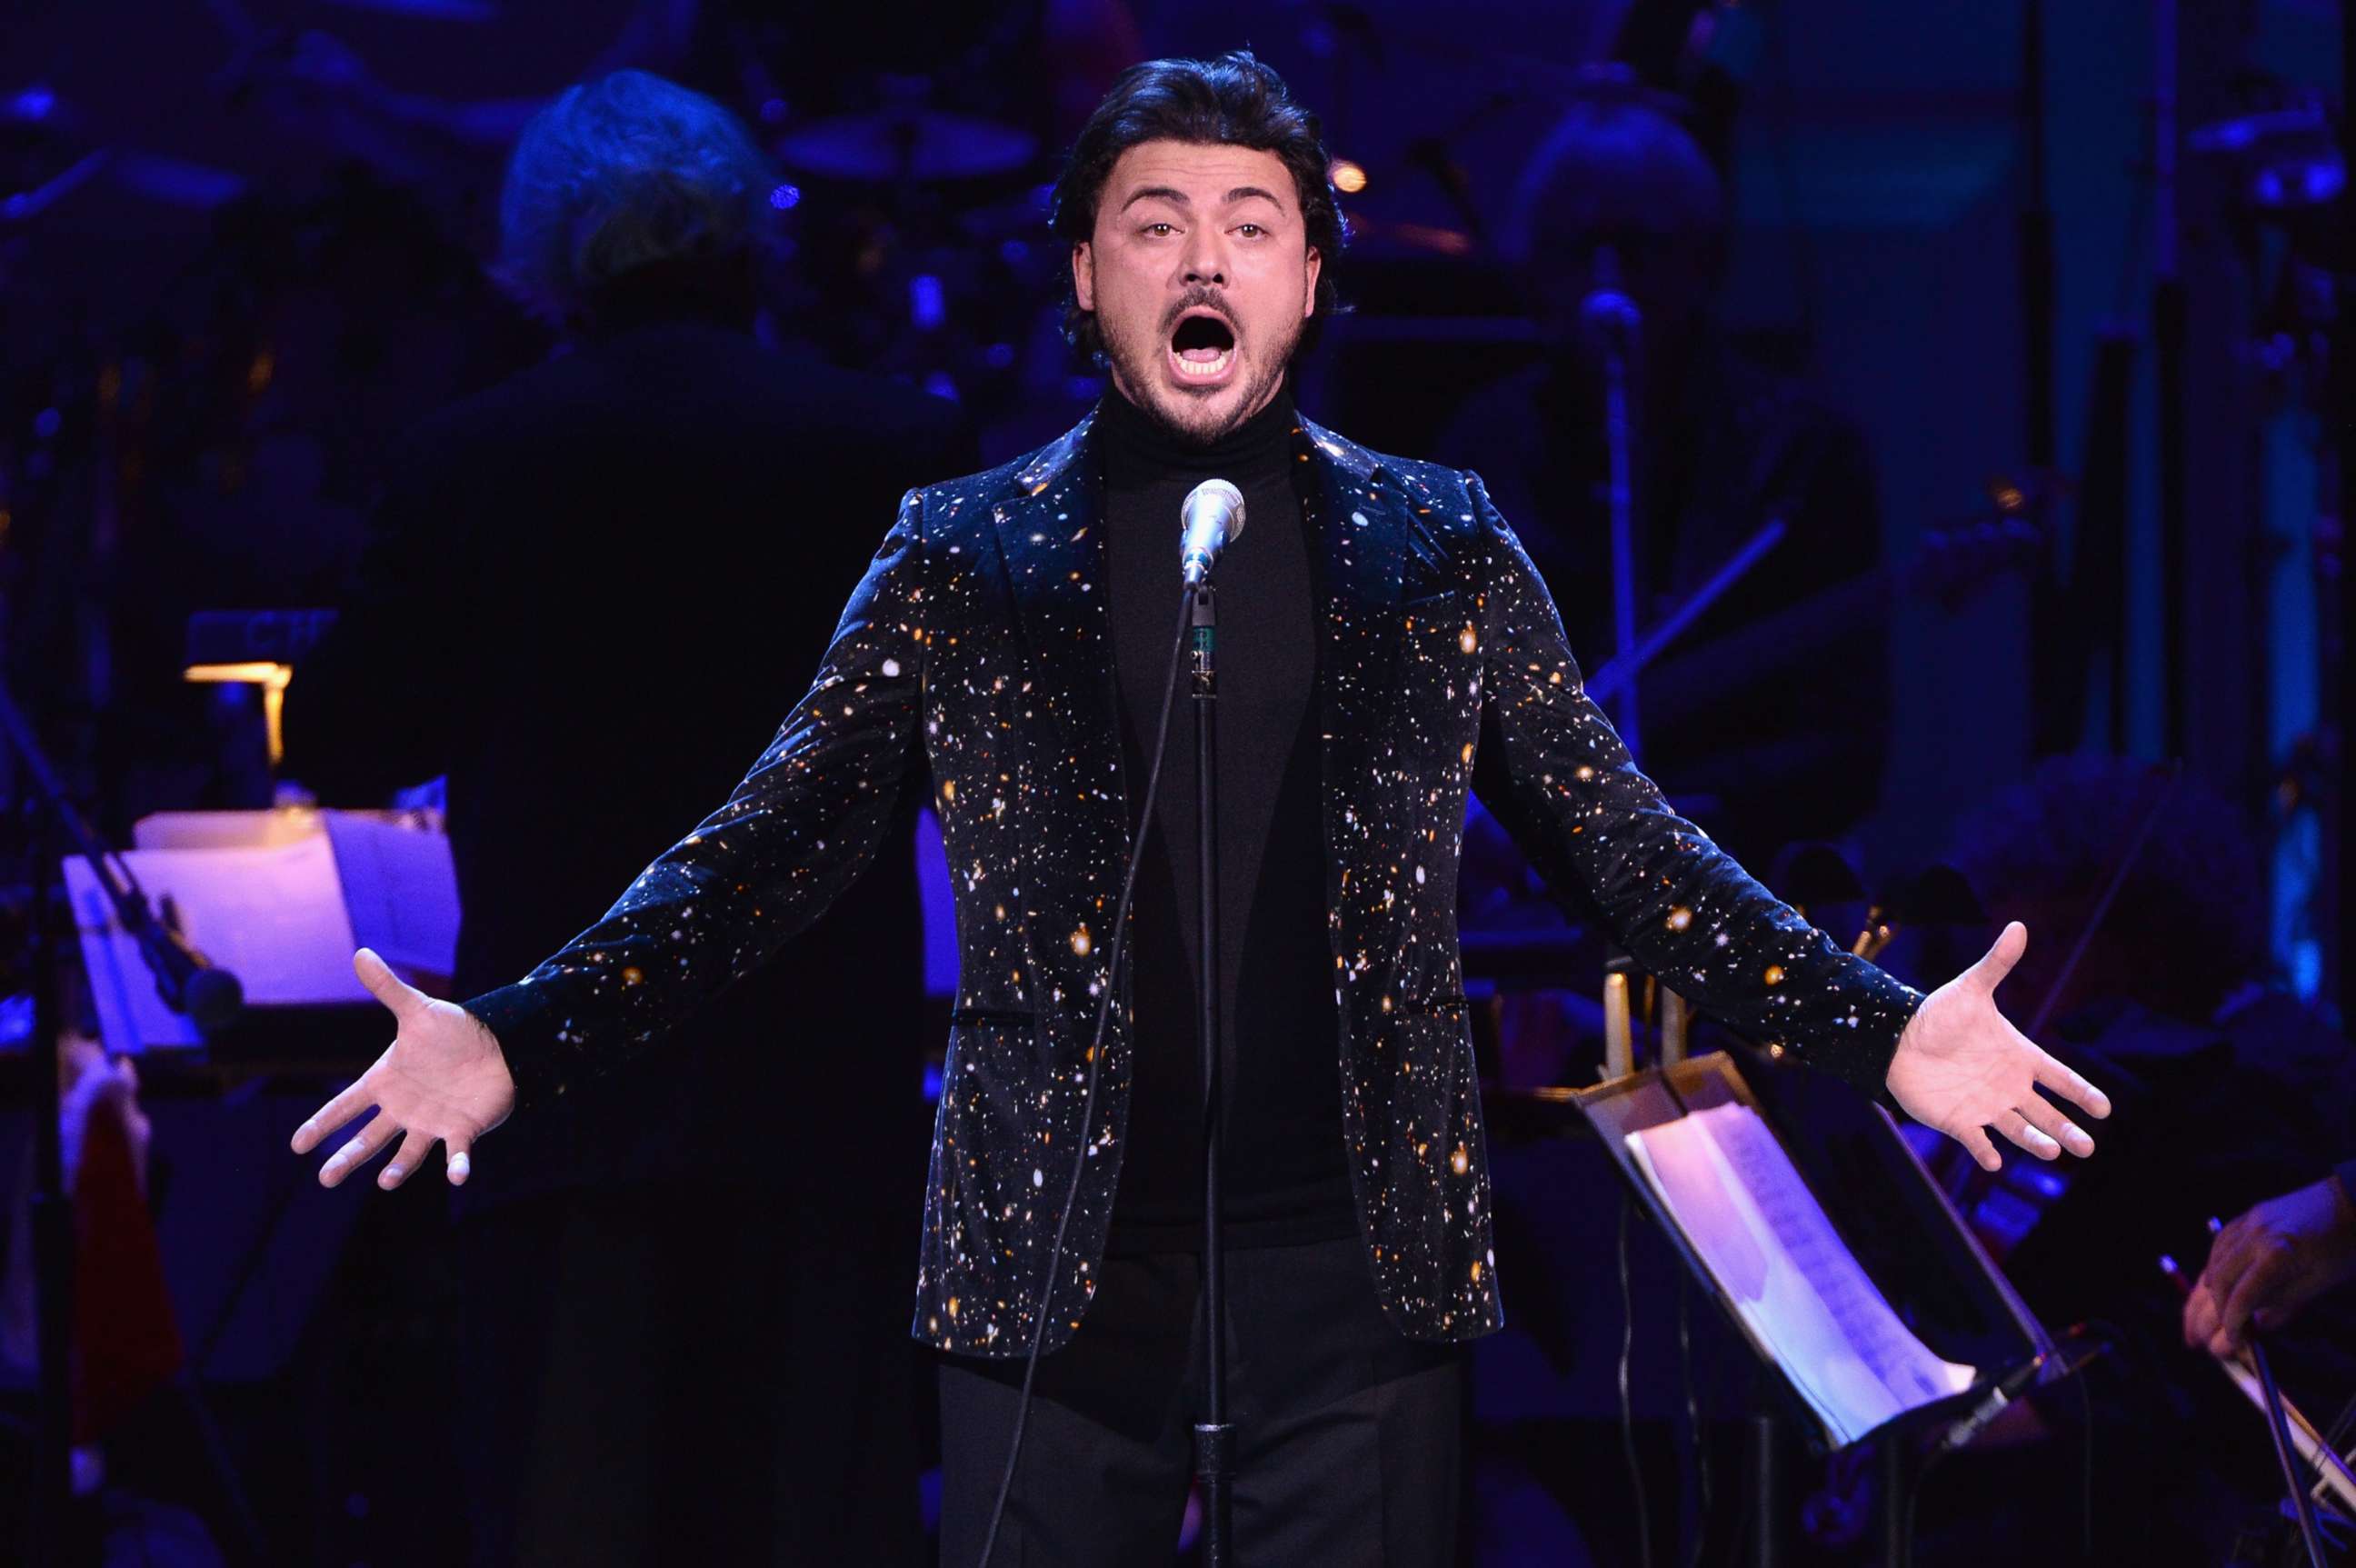 PHOTO: Vittorio Grigolo performs onstage during The Revlon Concert for the Rainforest Fund "Baby It's Cold Outside" at Carnegie Hall on December 14, 2016 in New York City.